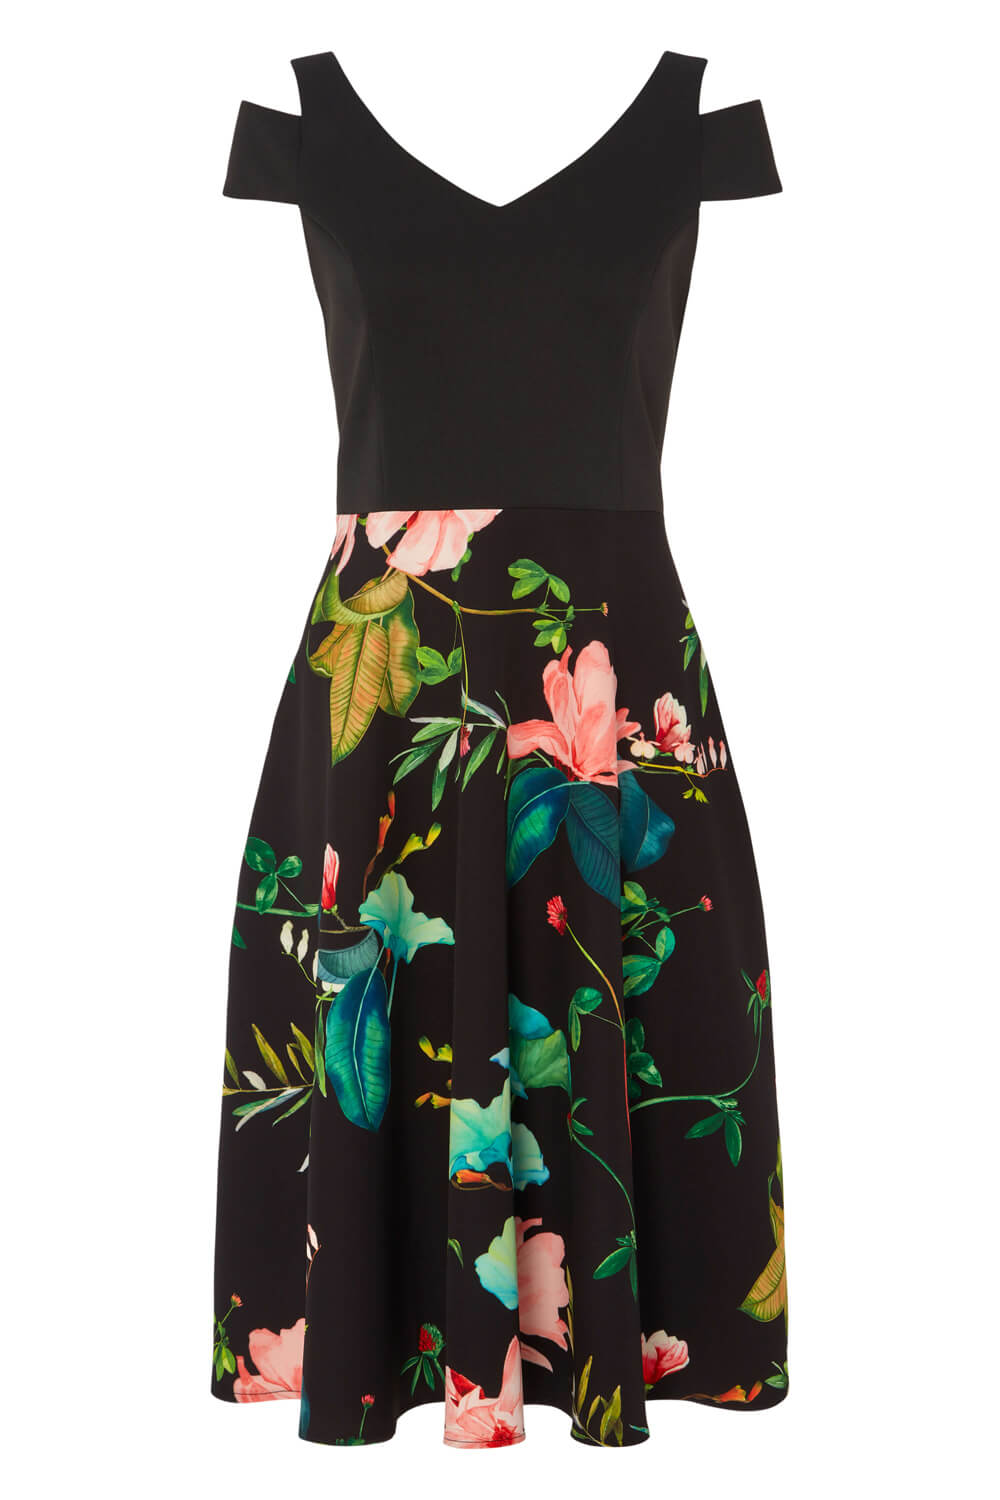 Black Floral Print Fit and Flare Scuba Dress, Image 4 of 4